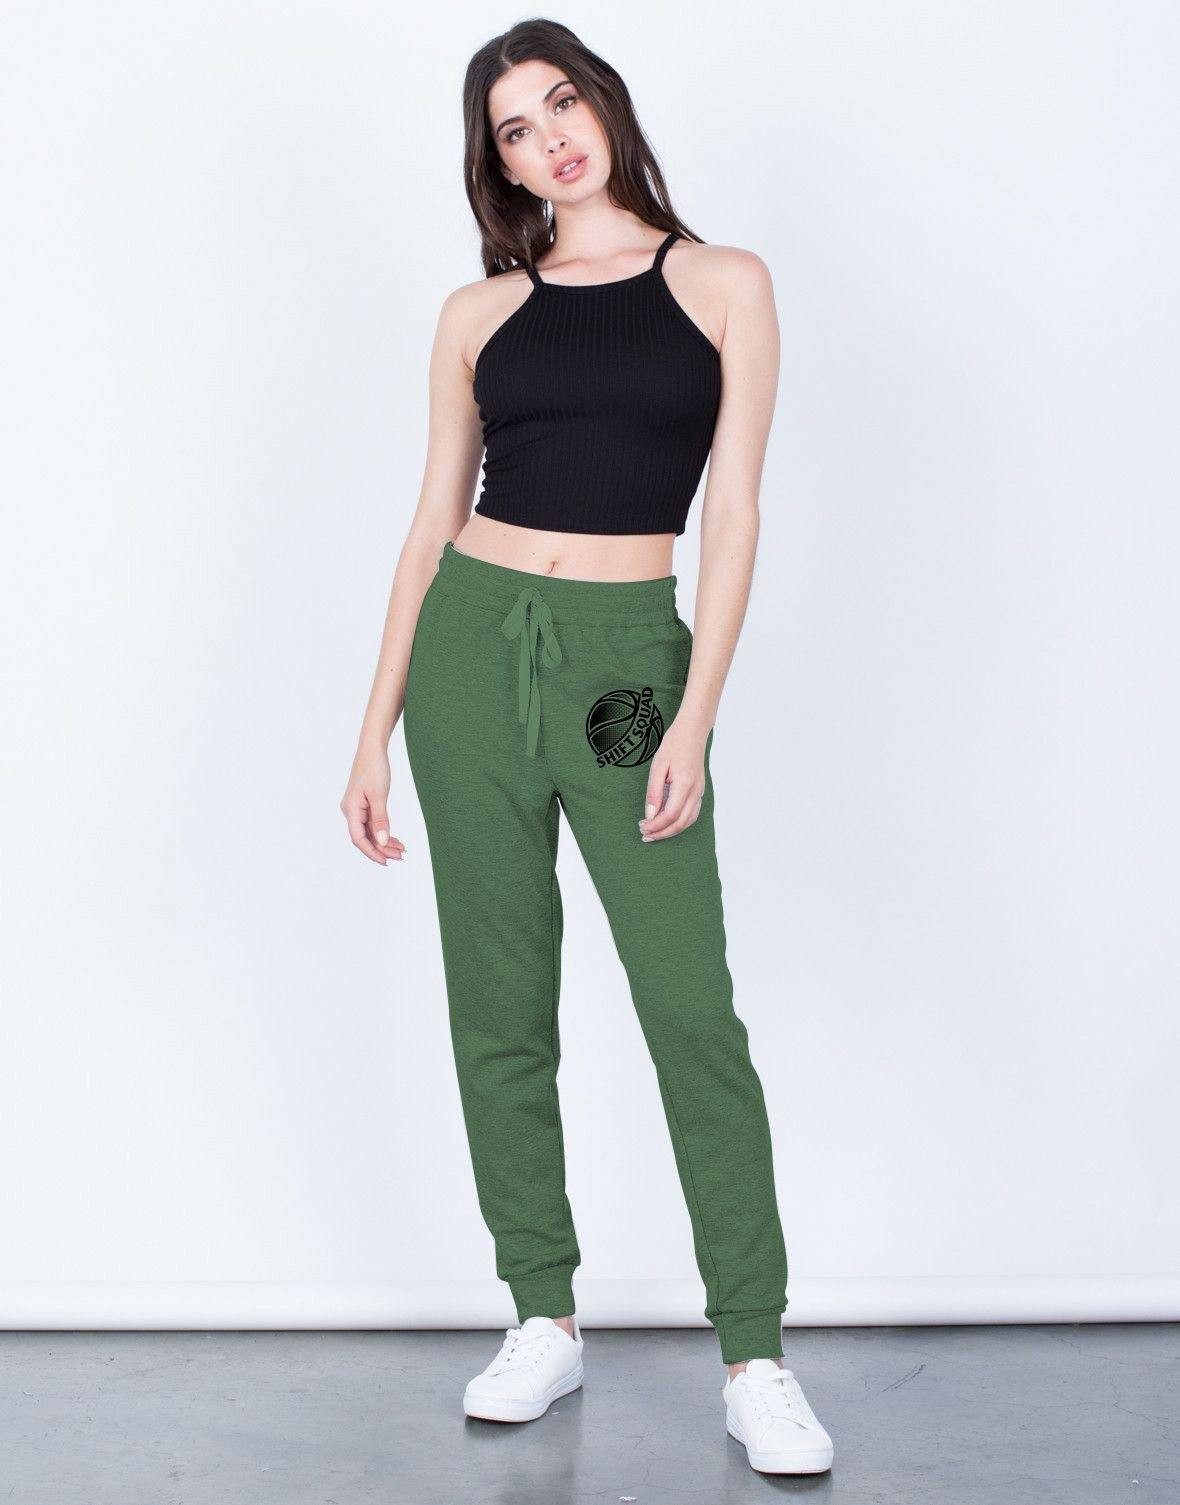 Chime and Black Shiftsquad Women's Sweatpants Spring and Summer Line - Shiftsquad